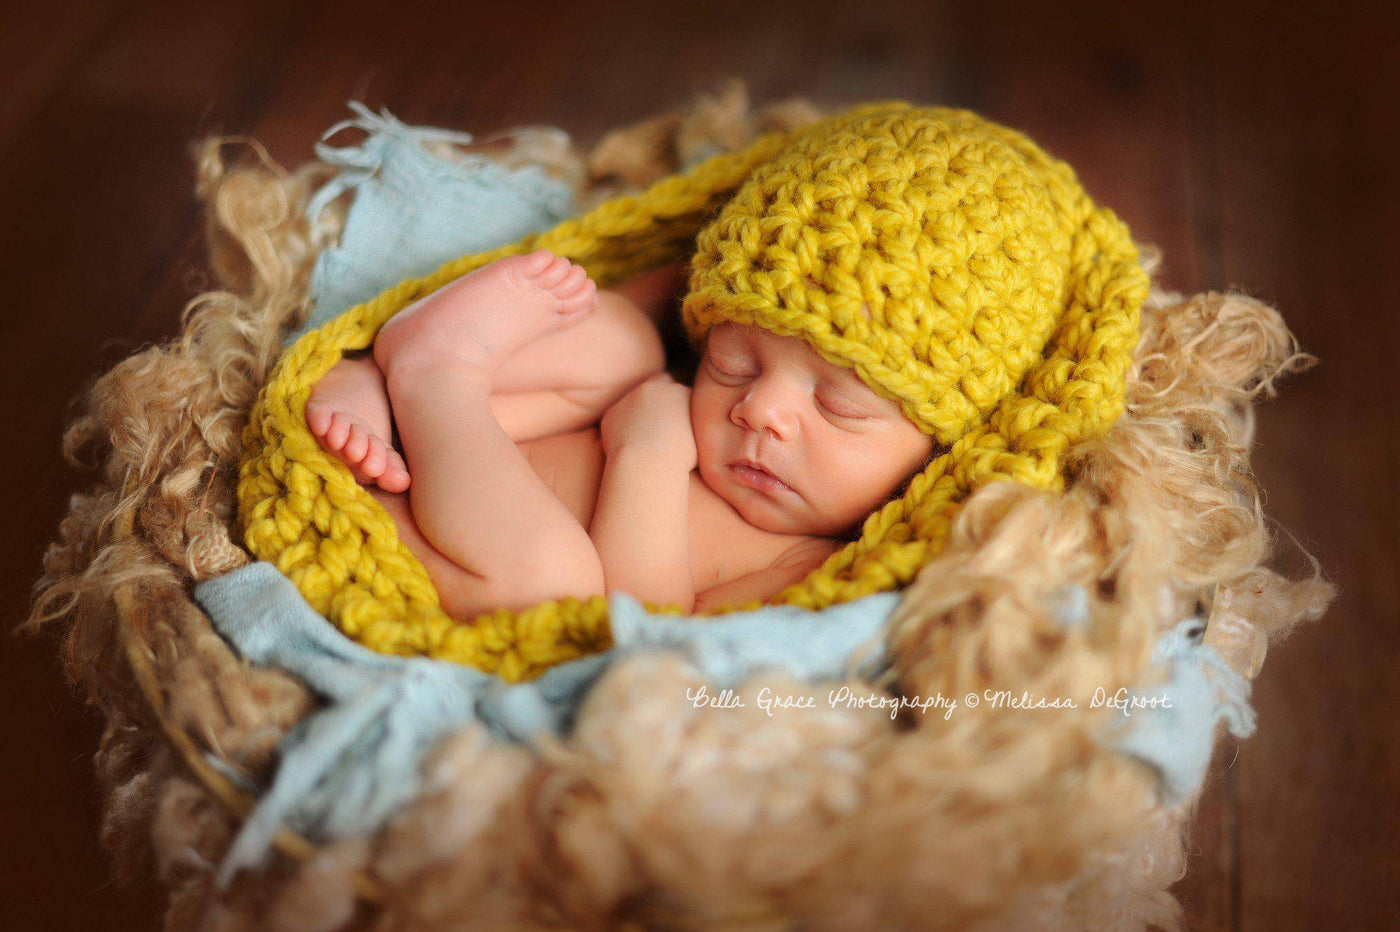 Citron Yellow Baby Bowl And Hat Set - Beautiful Photo Props